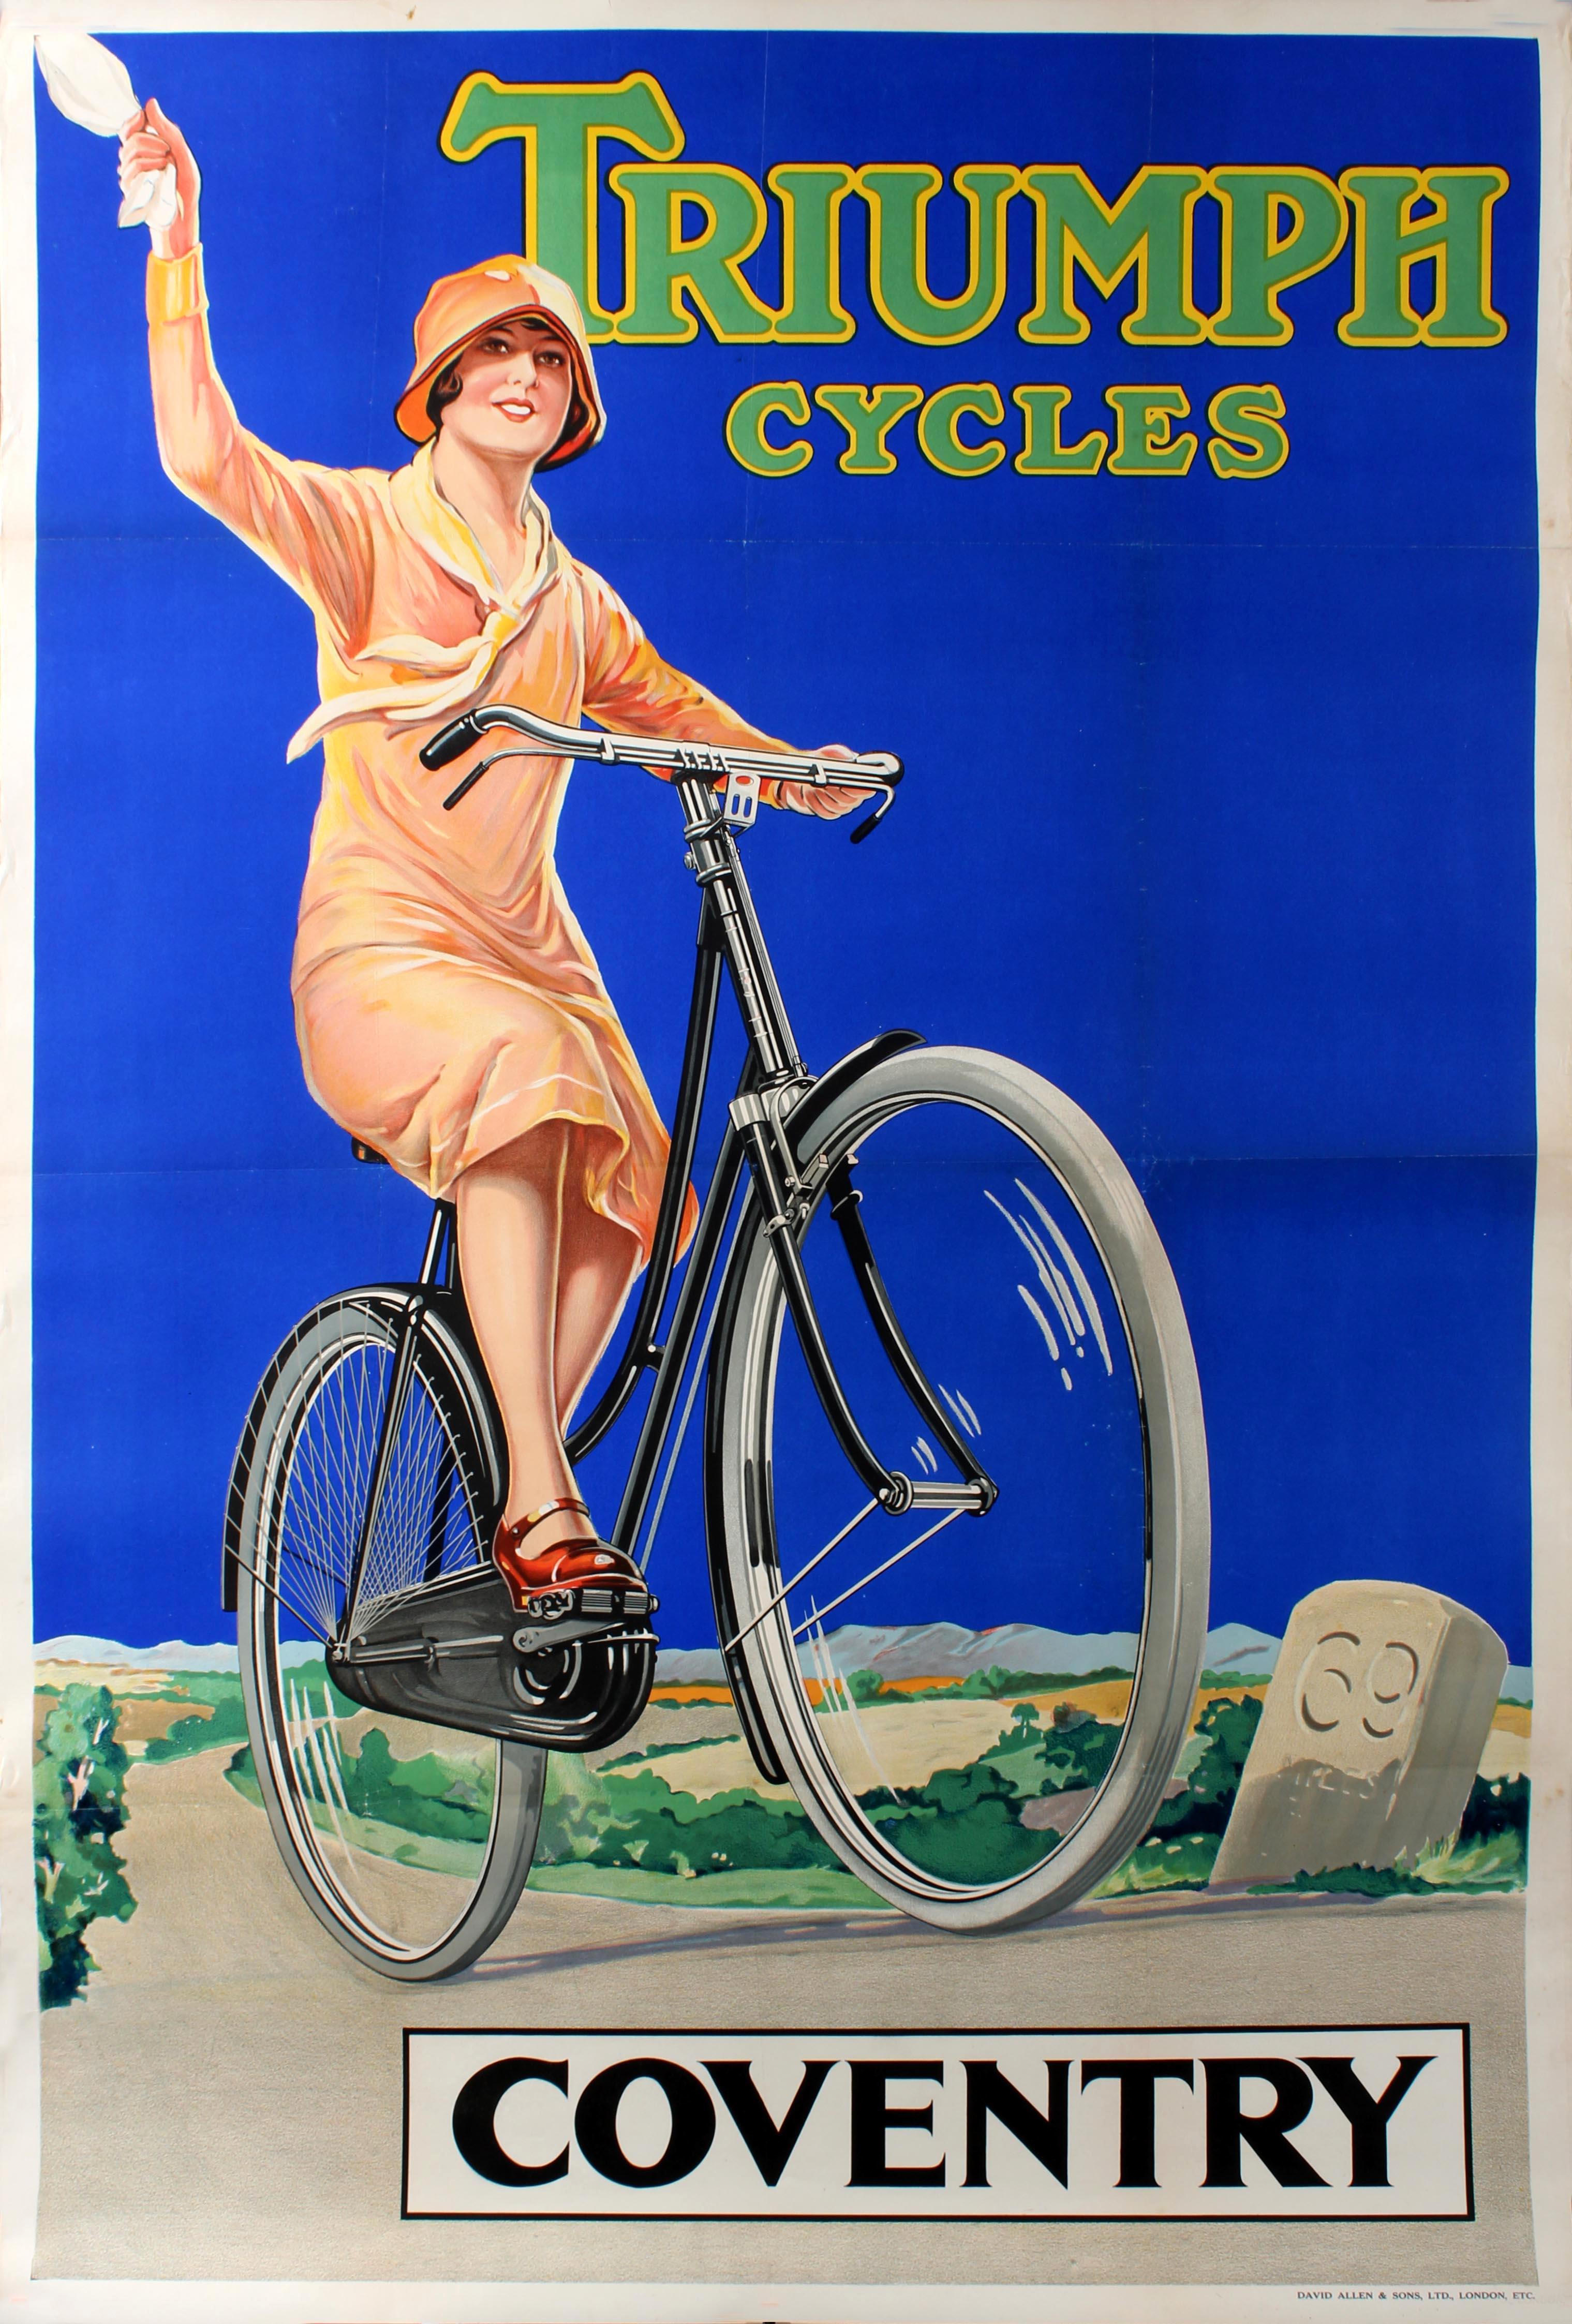 Unknown Print - Original Vintage Bicycle Advertising Poster For Triumph Cycles Coventry 69